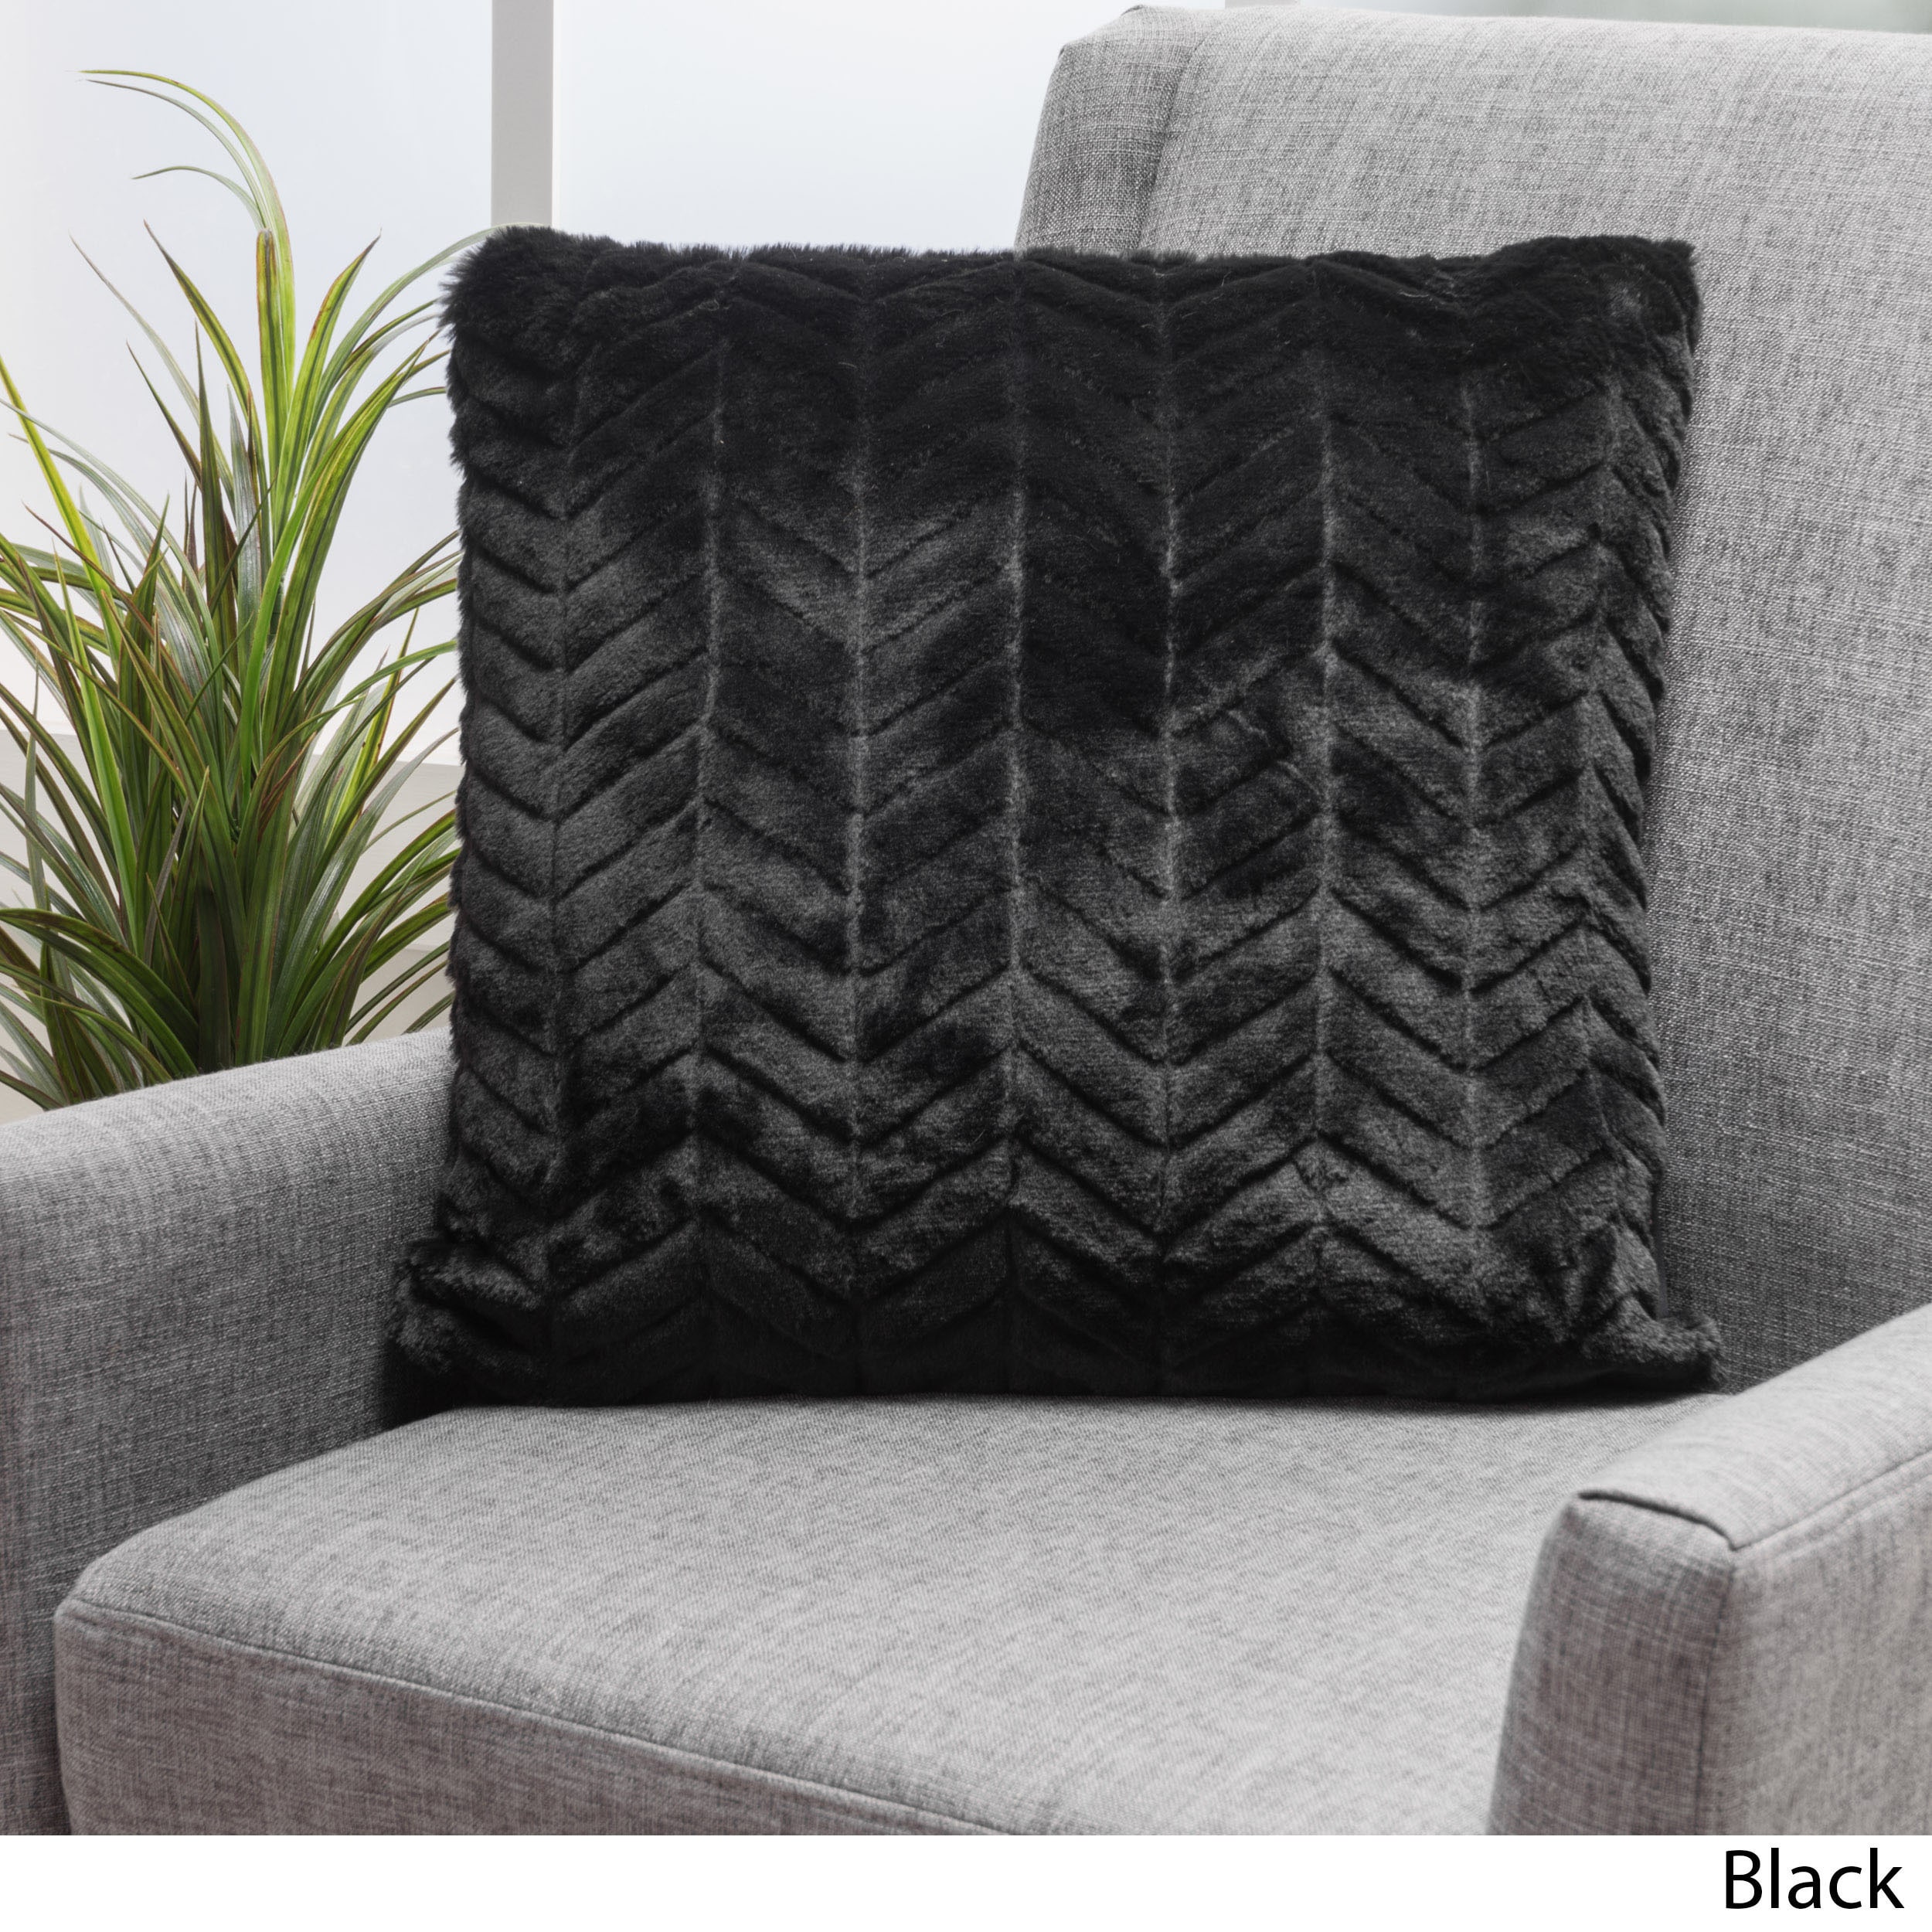 Christopher Knight Home Elise Modern Glam Faux Fur Throw Pillows (Set of 2) by - image 3 of 5